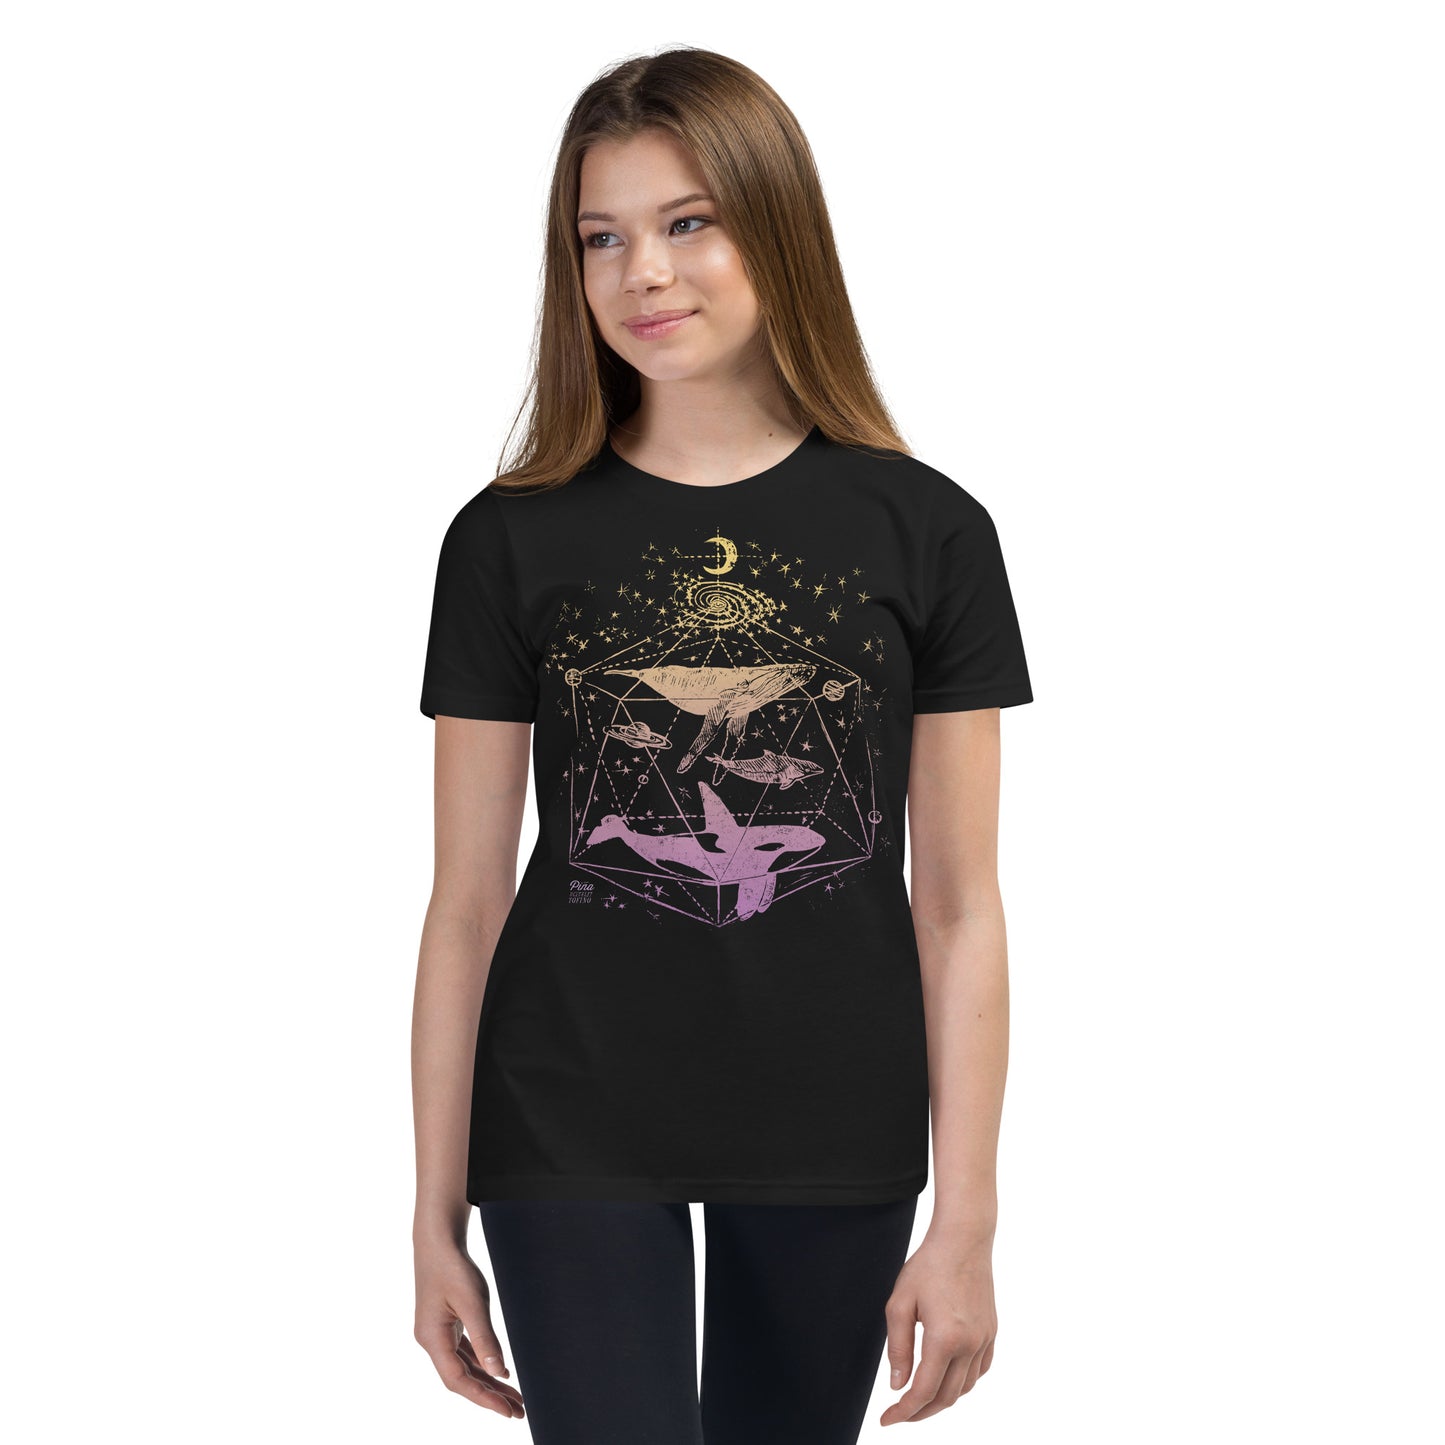 Galactic Whales in Colour Youth Tee